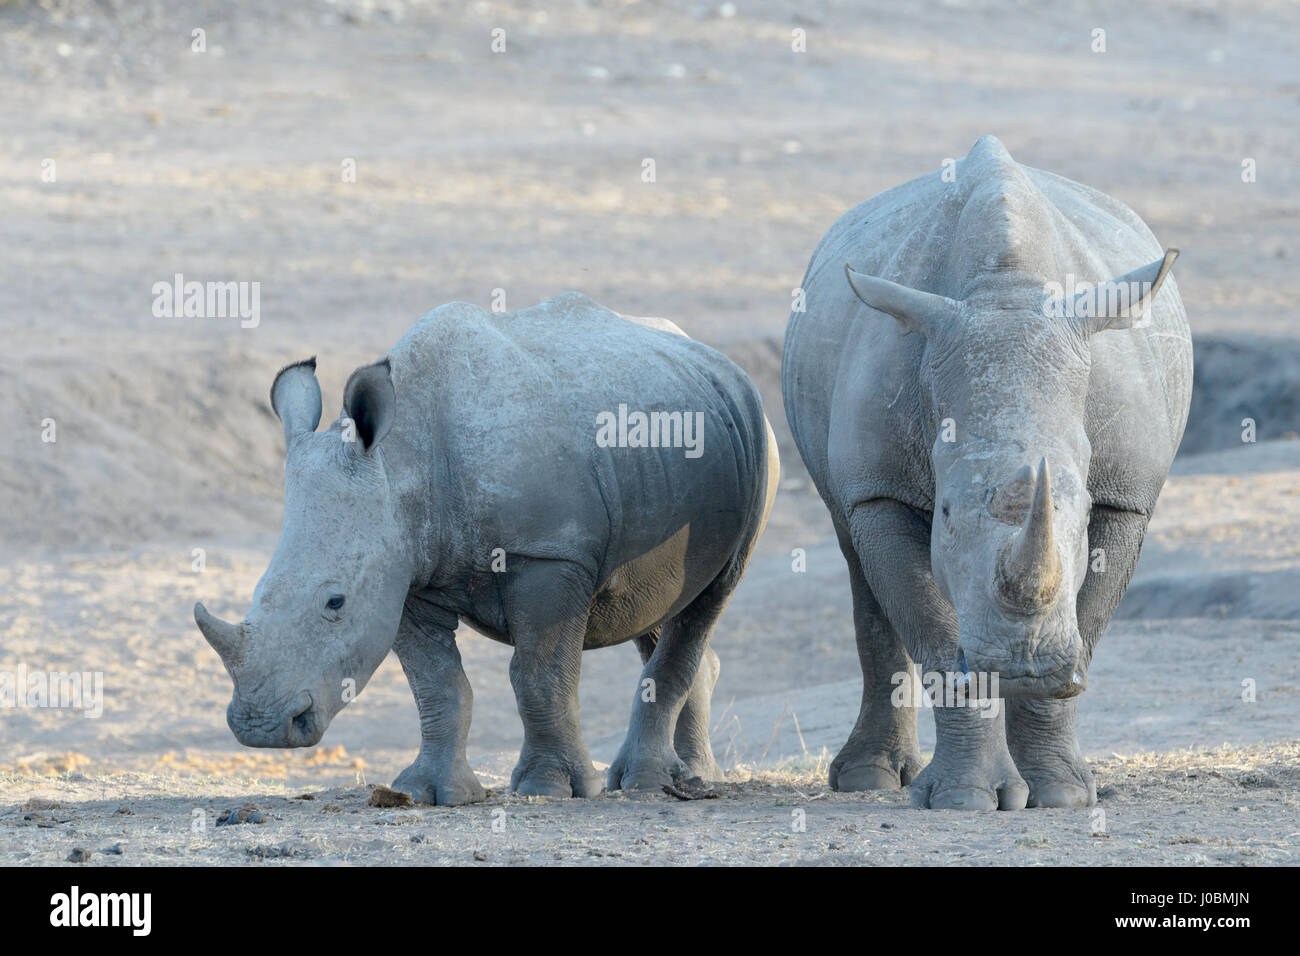 White rhinoceros (Ceratotherium simun) mother with calf standing at whaterhole at sunset, Kruger National Park, South Africa Stock Photo